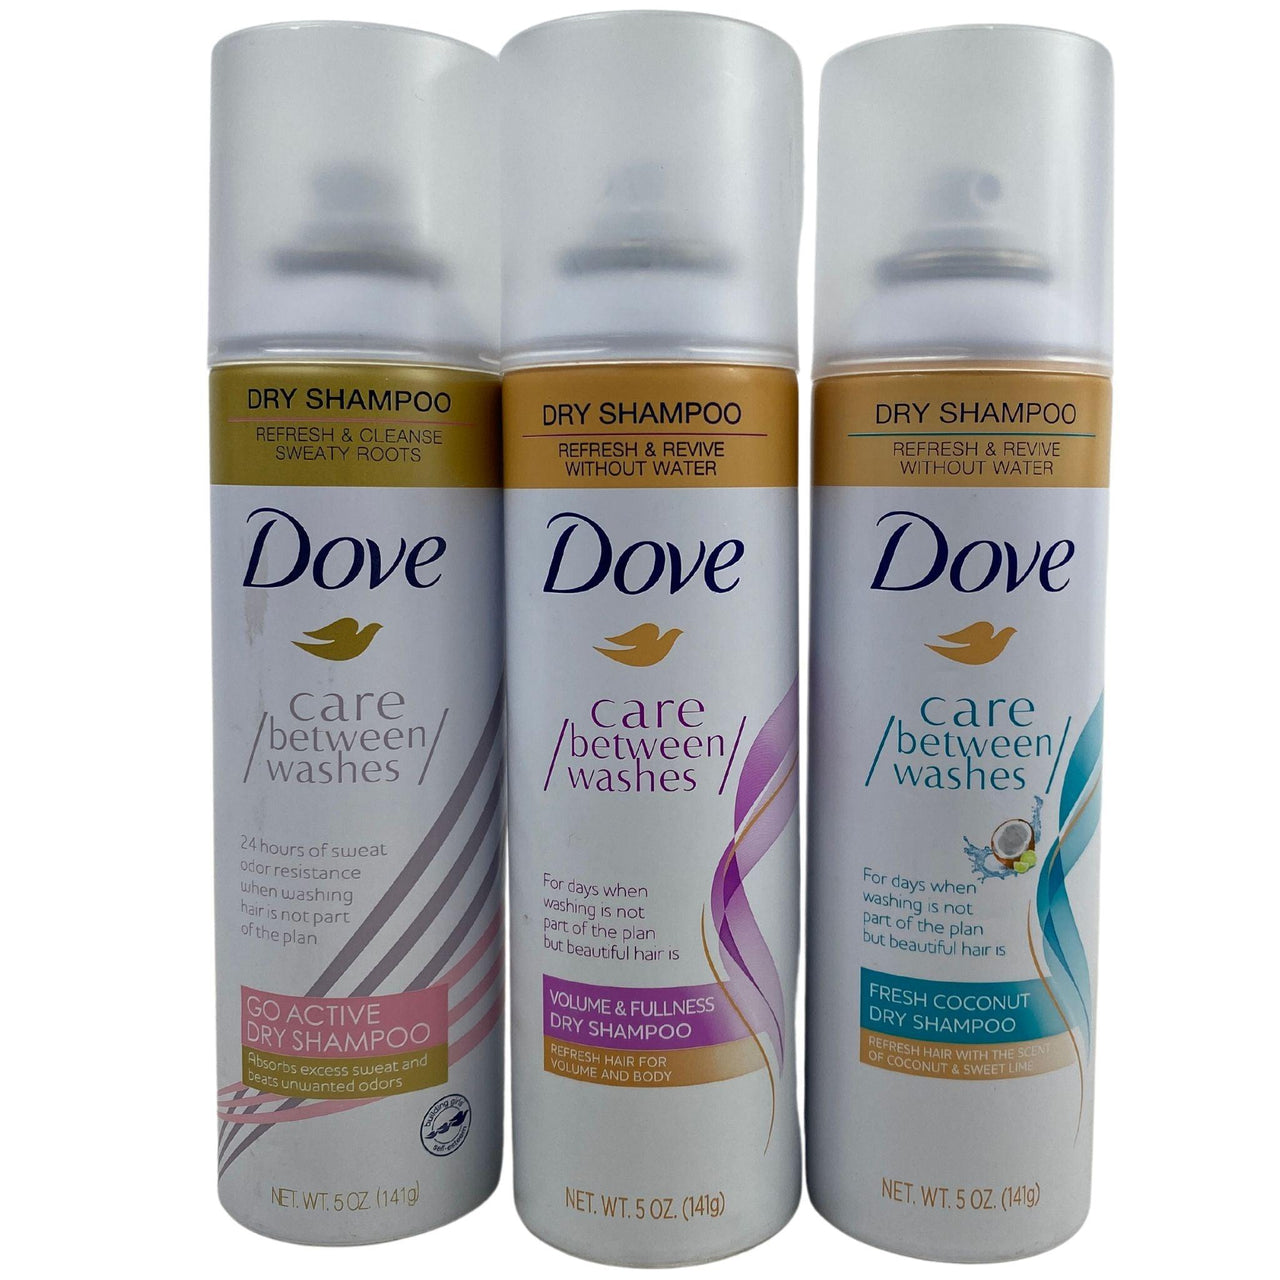 Dove Care Between Washes Dry Shampoo Refresh & Revive Without Water Mix 5OZ (50 Pcs Lot) - Discount Wholesalers Inc